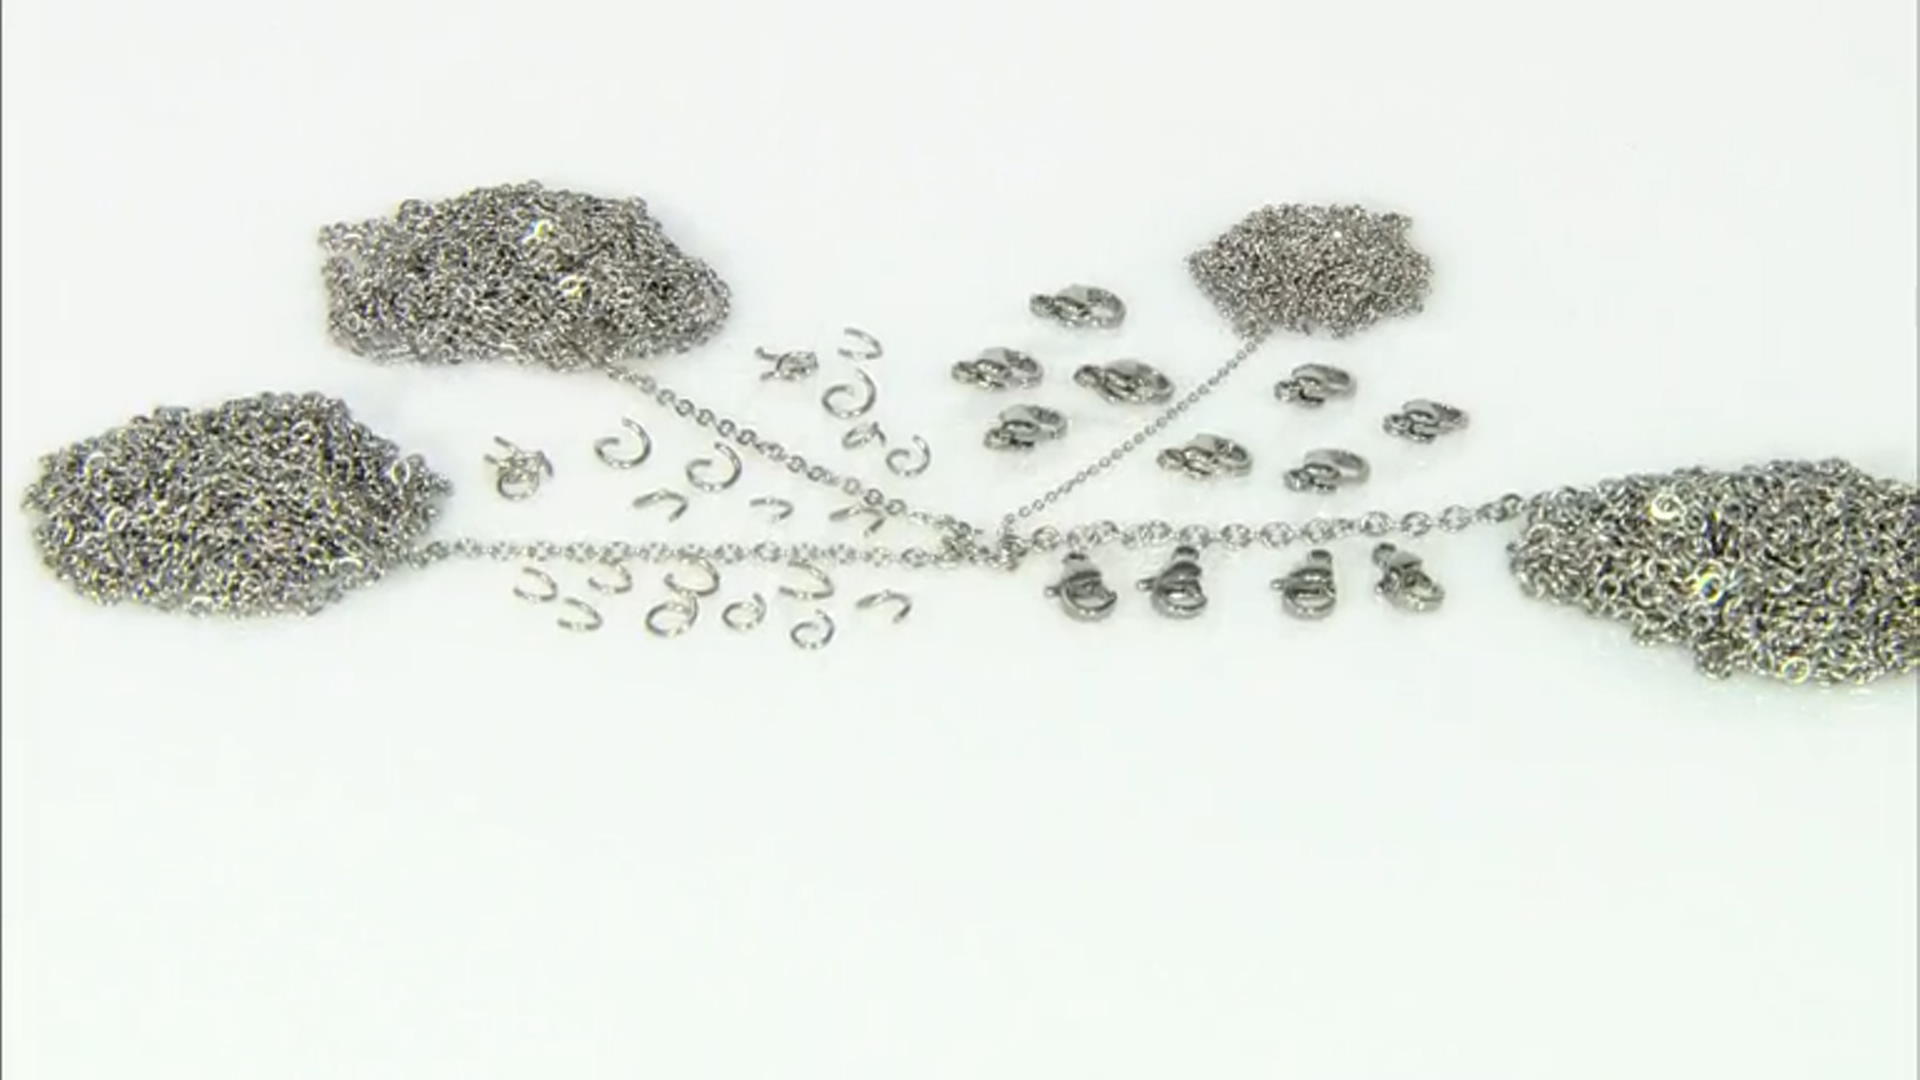 Stainless Steel Chain Appx 400" Total with Findings Appx 40 Pieces Total Video Thumbnail